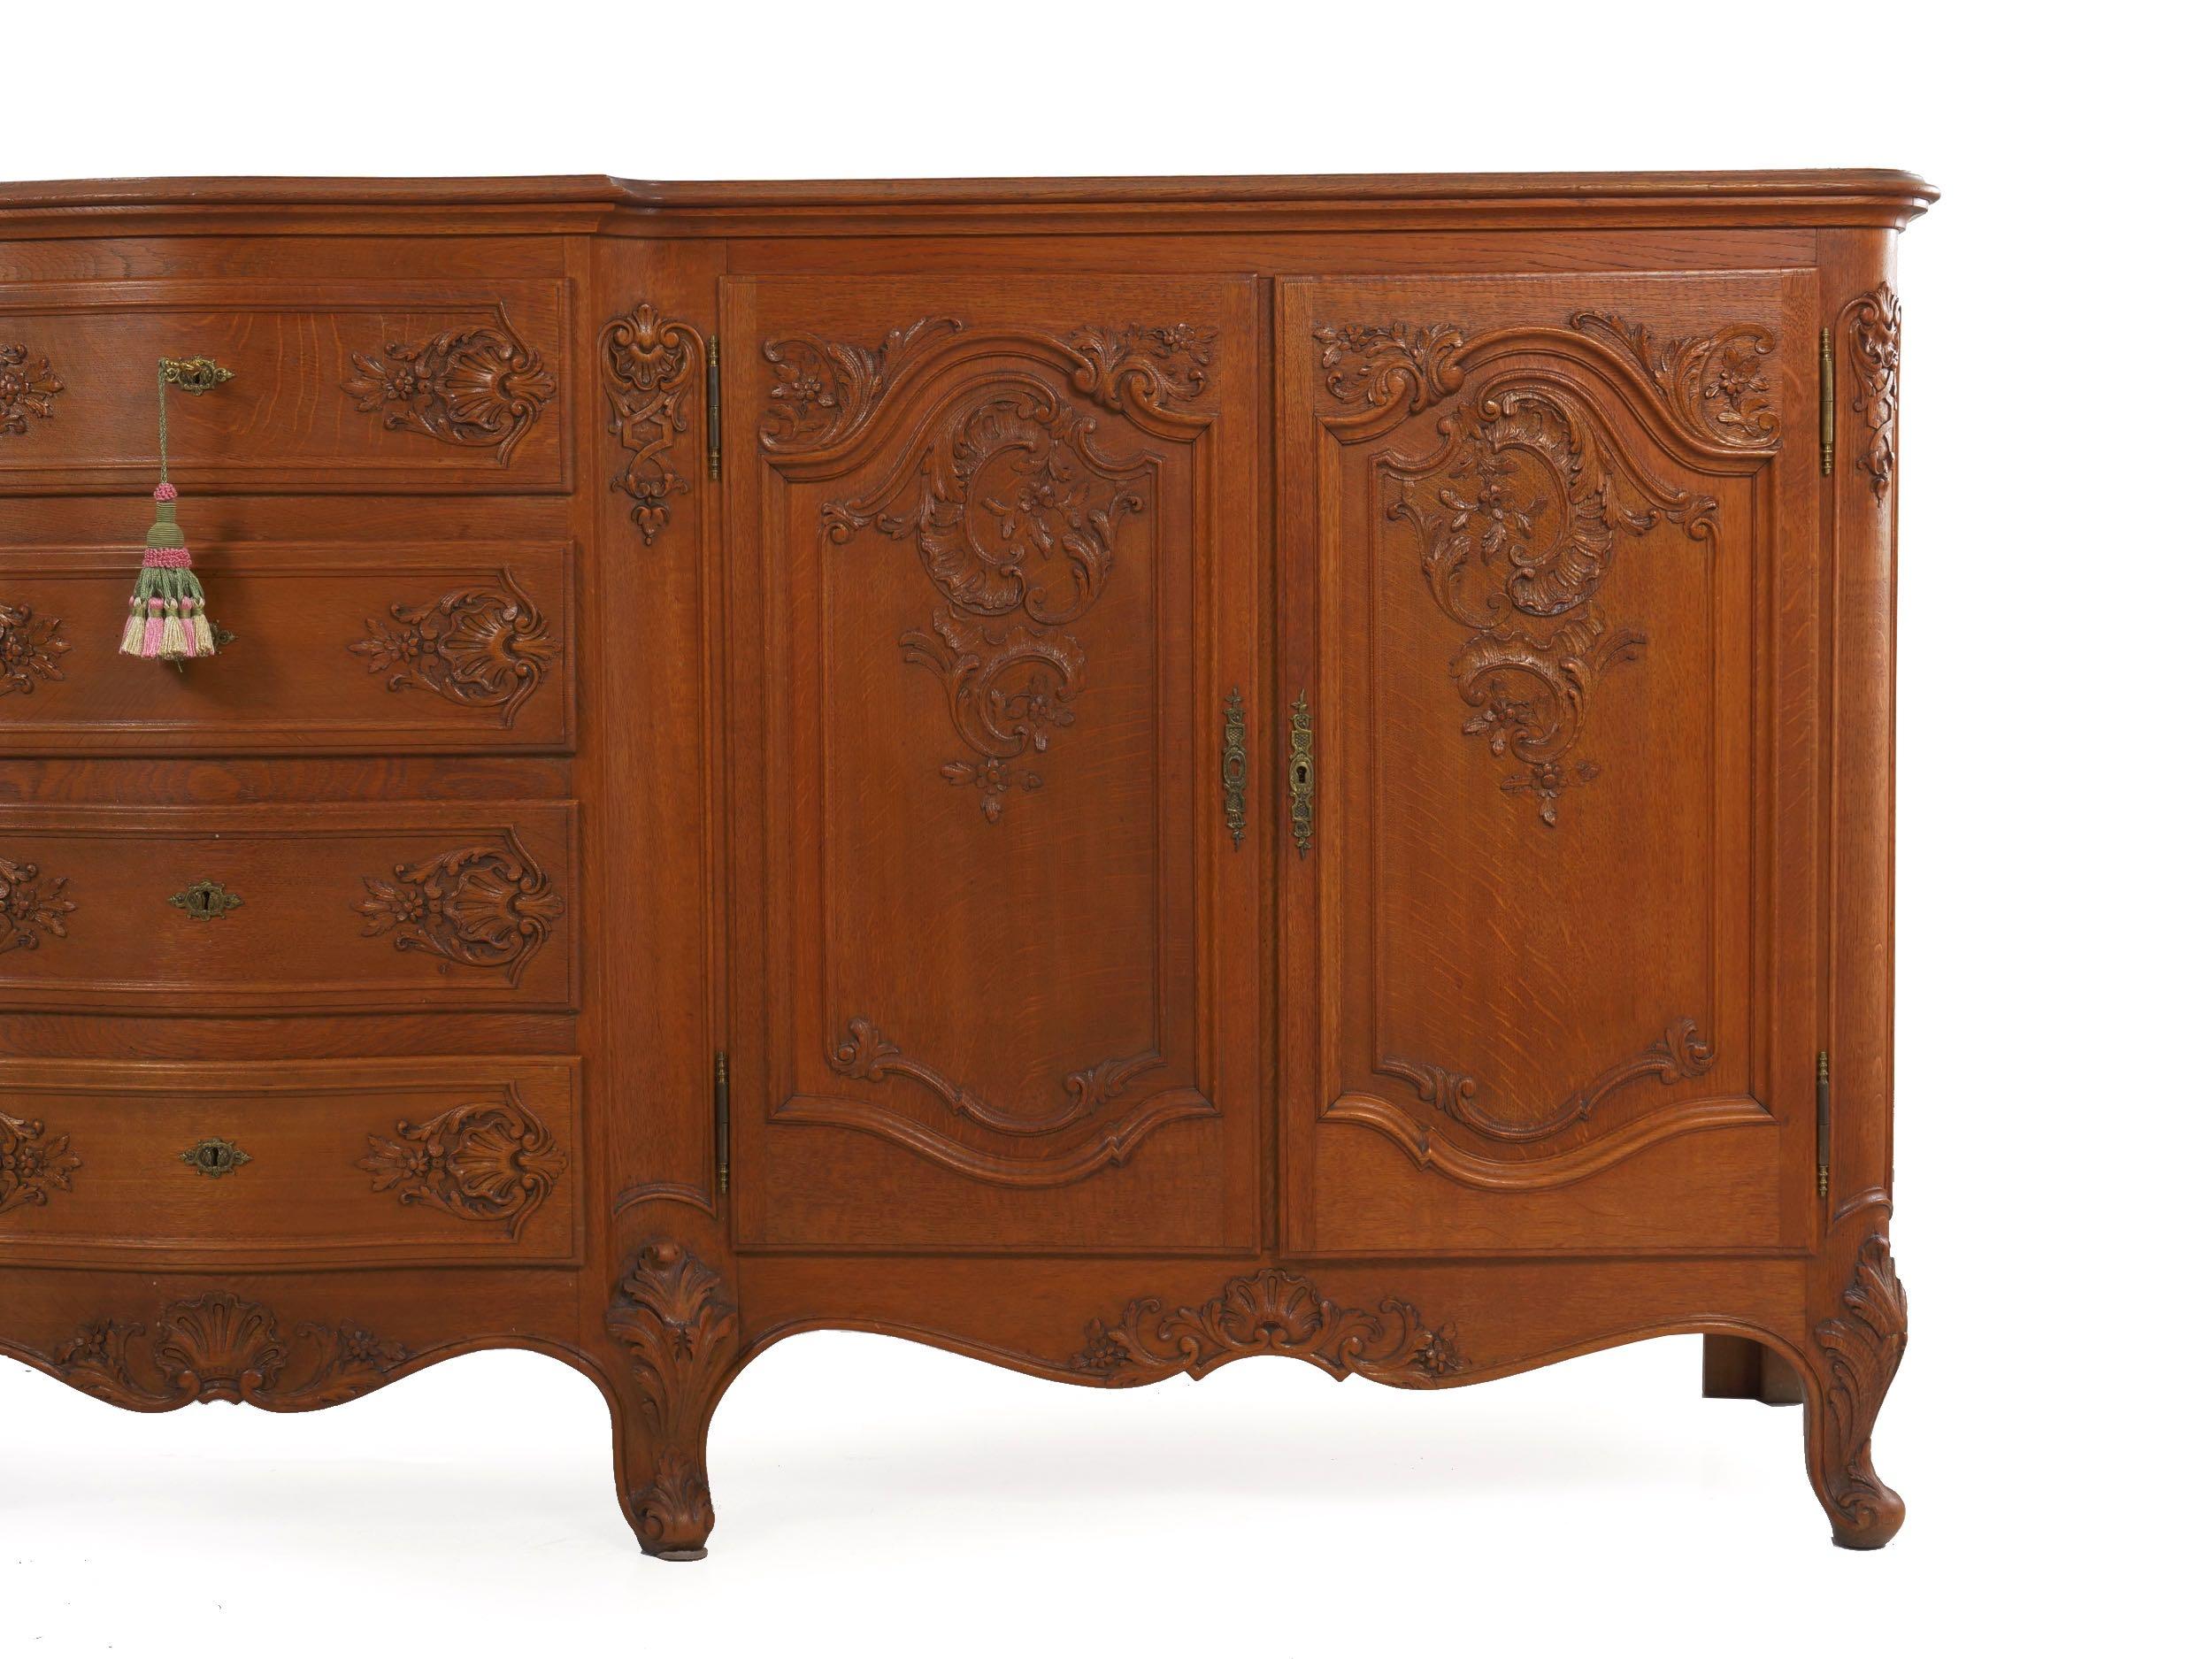 French Provincial Antique Carved Oak Buffet Server Sideboard, 19th Century 3